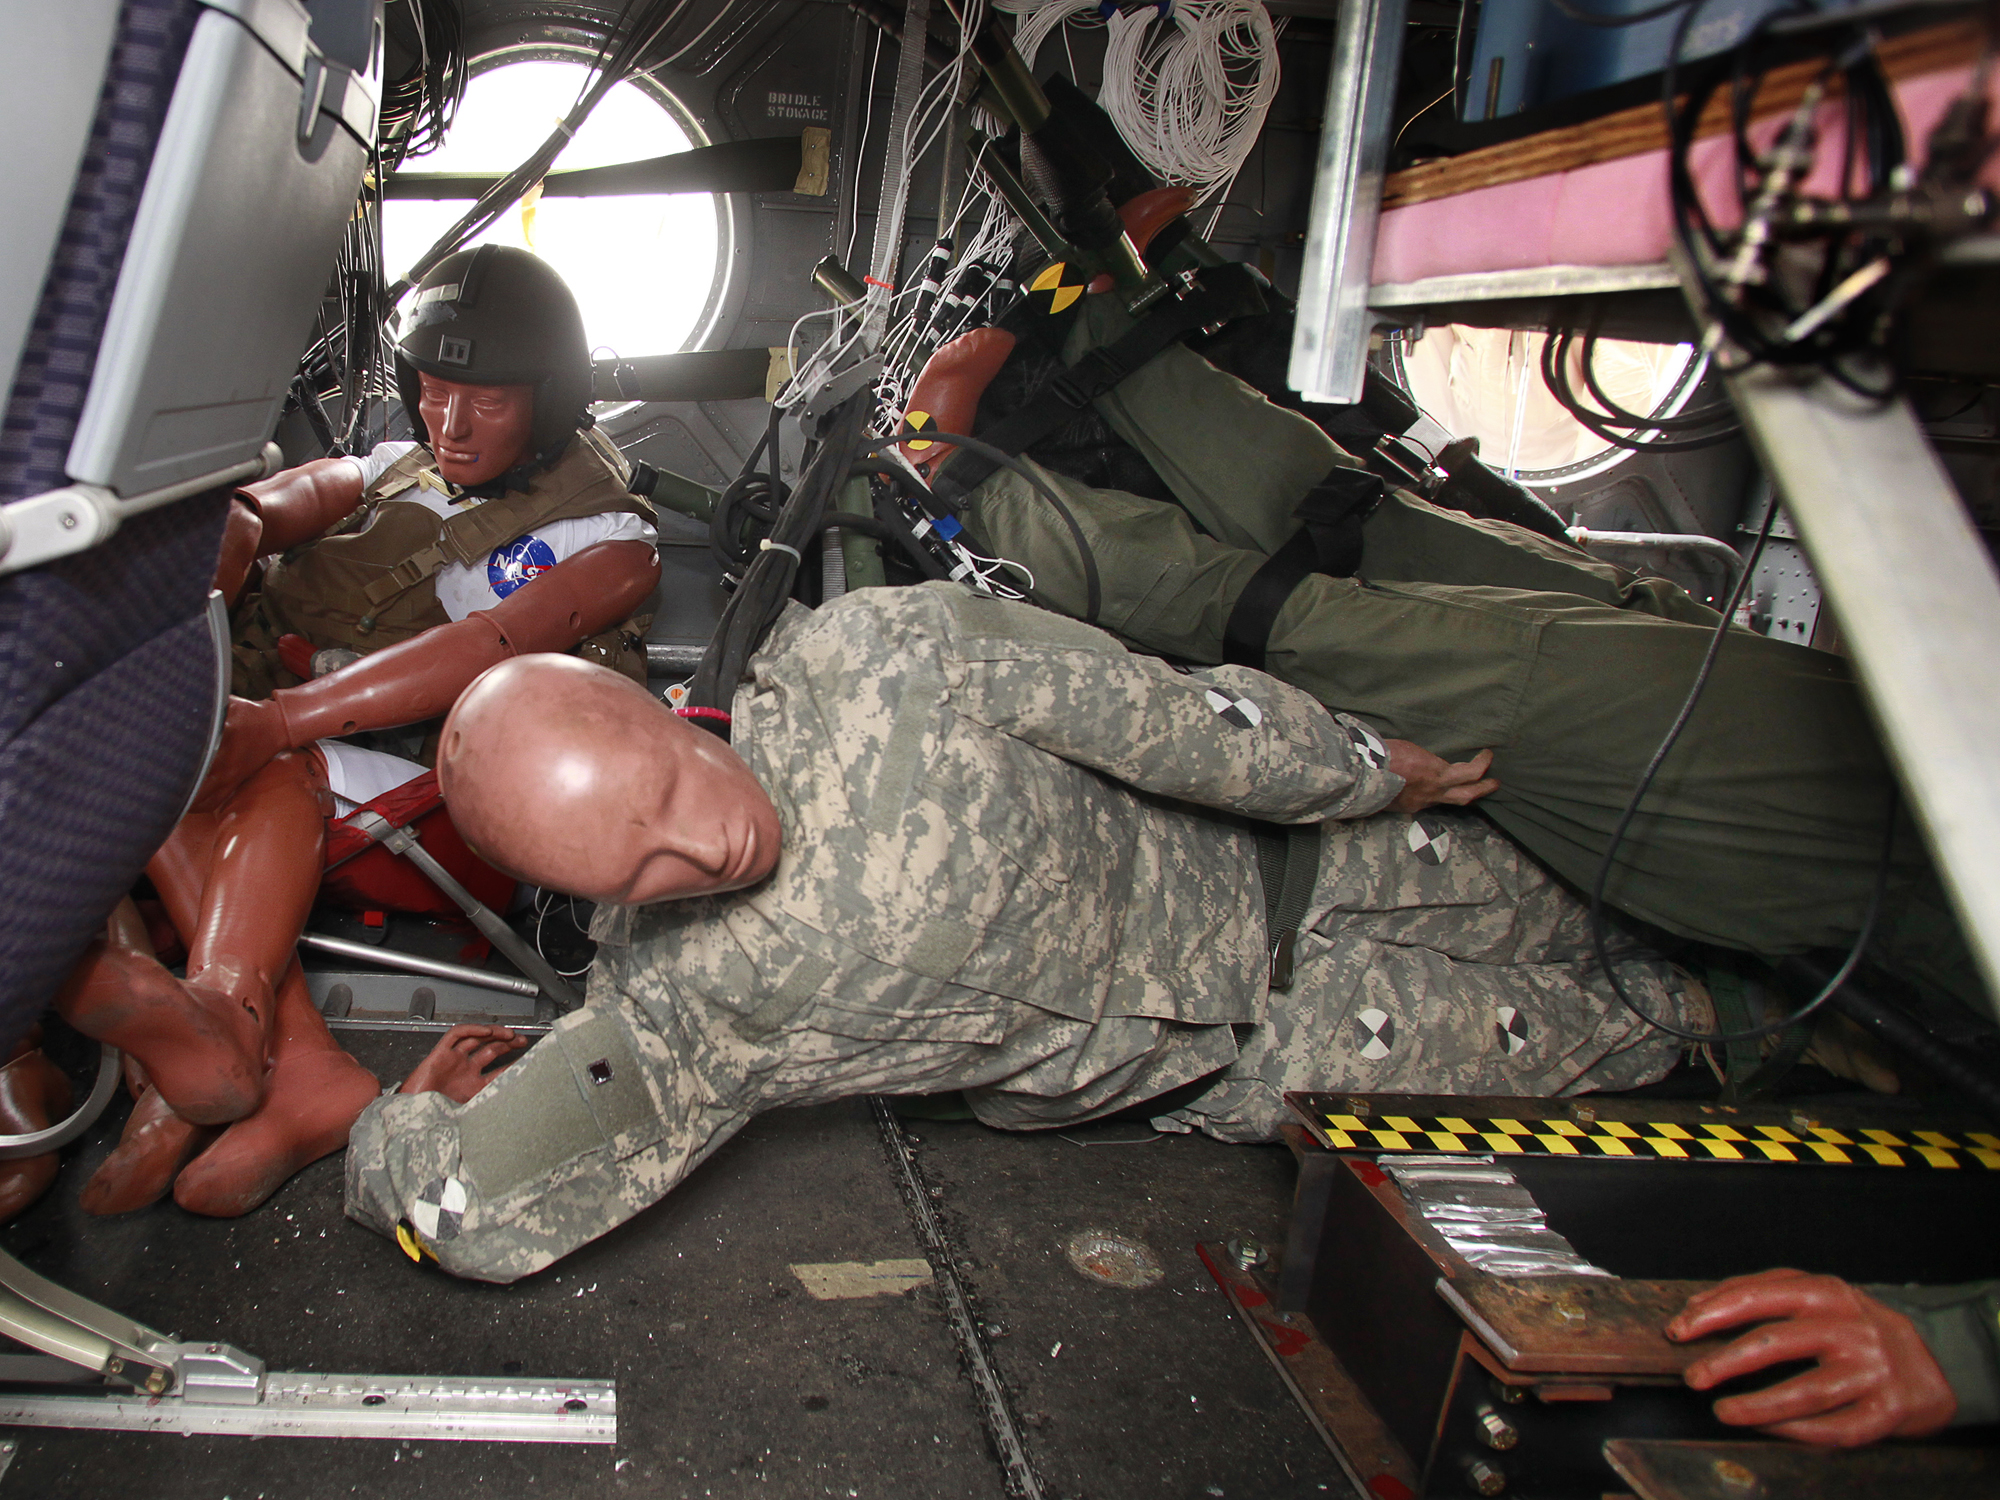 Crash dummies in a helicopter fuselage after a drop test.